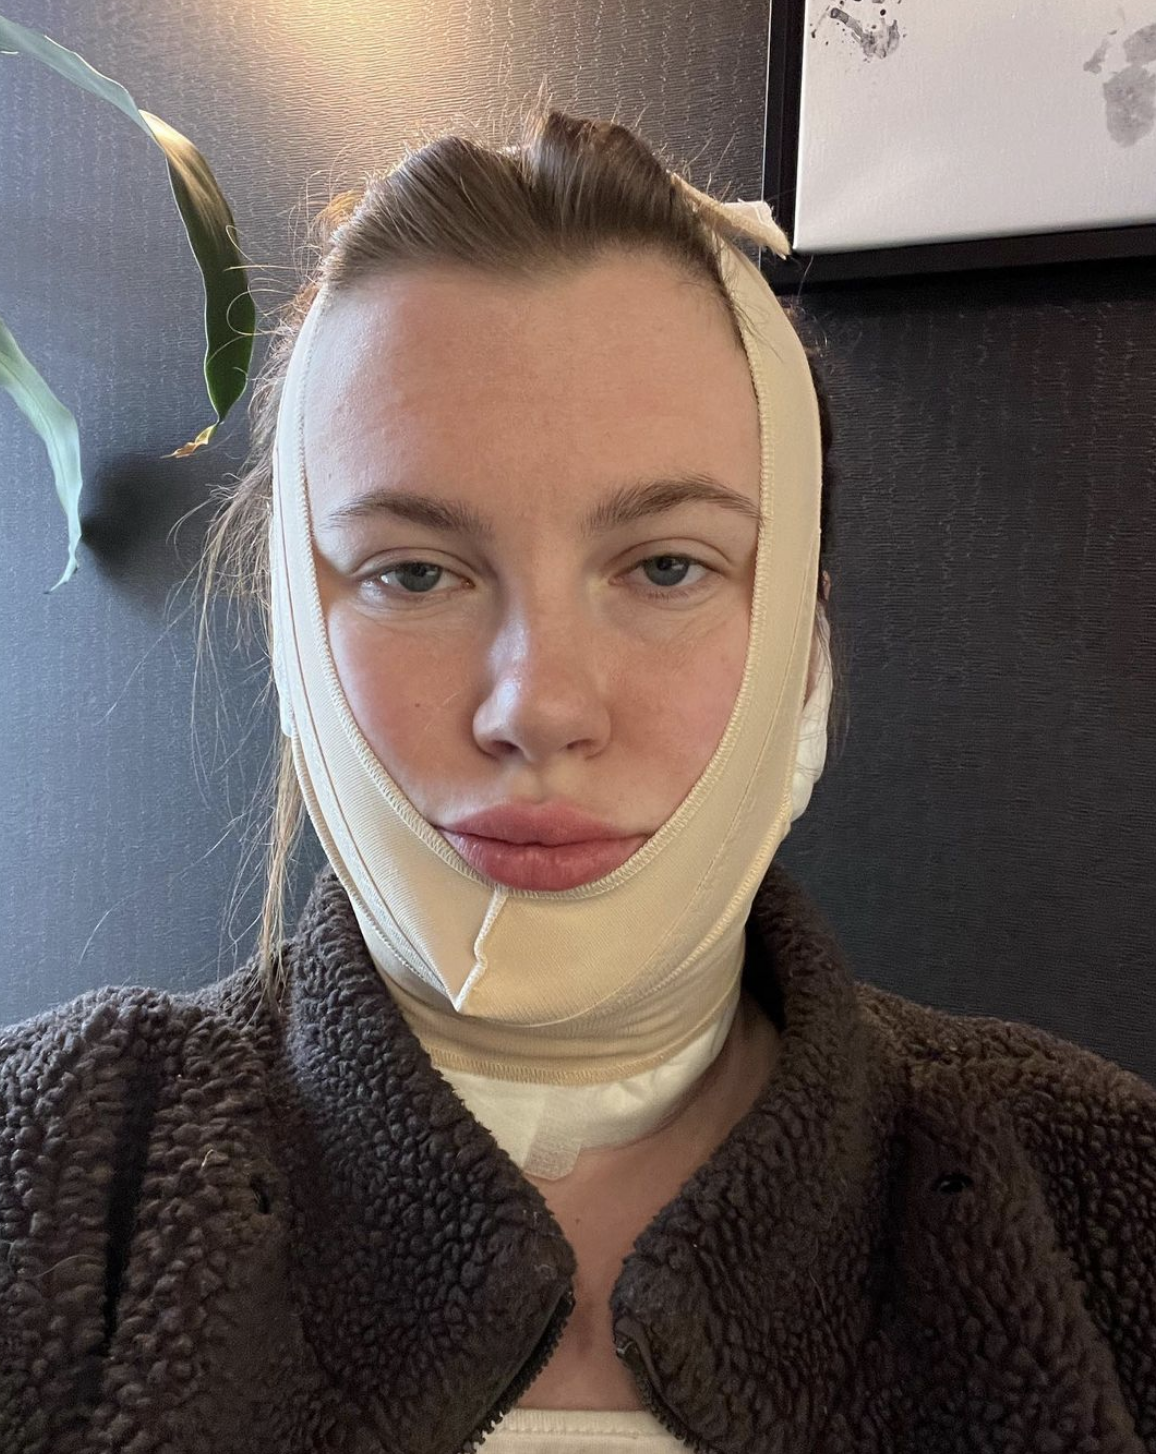 <p>Ireland Baldwin posted this photo of herself in a pressure bandage after undergoing a FaceTite procedure on her neck and chin on April 9, 2022. She explained in a TokTok <a href="https://www.instagram.com/p/CcQikMspFWw/">video</a> a few days later why she did it. She said the "hour-long, in-office procedure" that's "minimally invasive" didn't require anesthesia. "You don't go under the knife. Nothing like that. The reason I had it done is because I had this very stubborn pocket of fat and extra skin [on] my face," she explained. "As I've gained weight and as I've aged, it hasn't gone away at all. It's only become worse and worse." According to Ireland, diet and exercise didn't help the "pocket of fat" she disliked. She defended herself against criticisms that she's too young to have the procedure. "I'm 26. I'm not underage. I'm a consenting adult who made this choice and I couldn't be happier," she said. Ireland also said she's had "no other modifications done to my body or my face."</p>